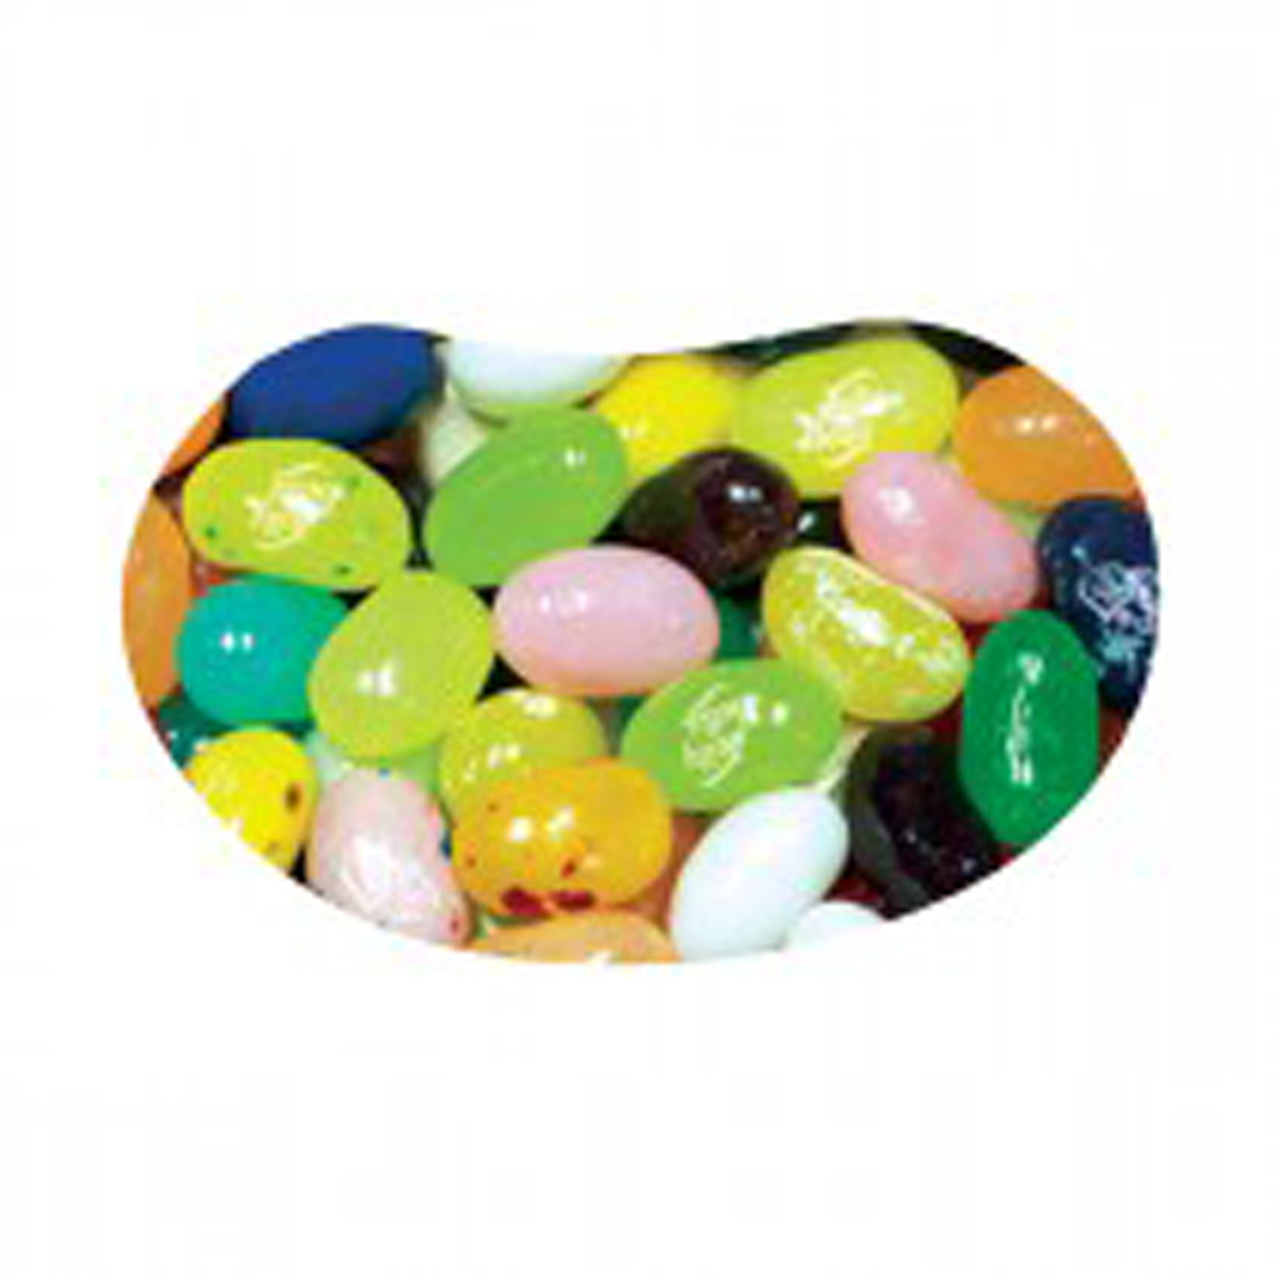 Jelly Belly 50 Flavor Gourmet Jelly Beans